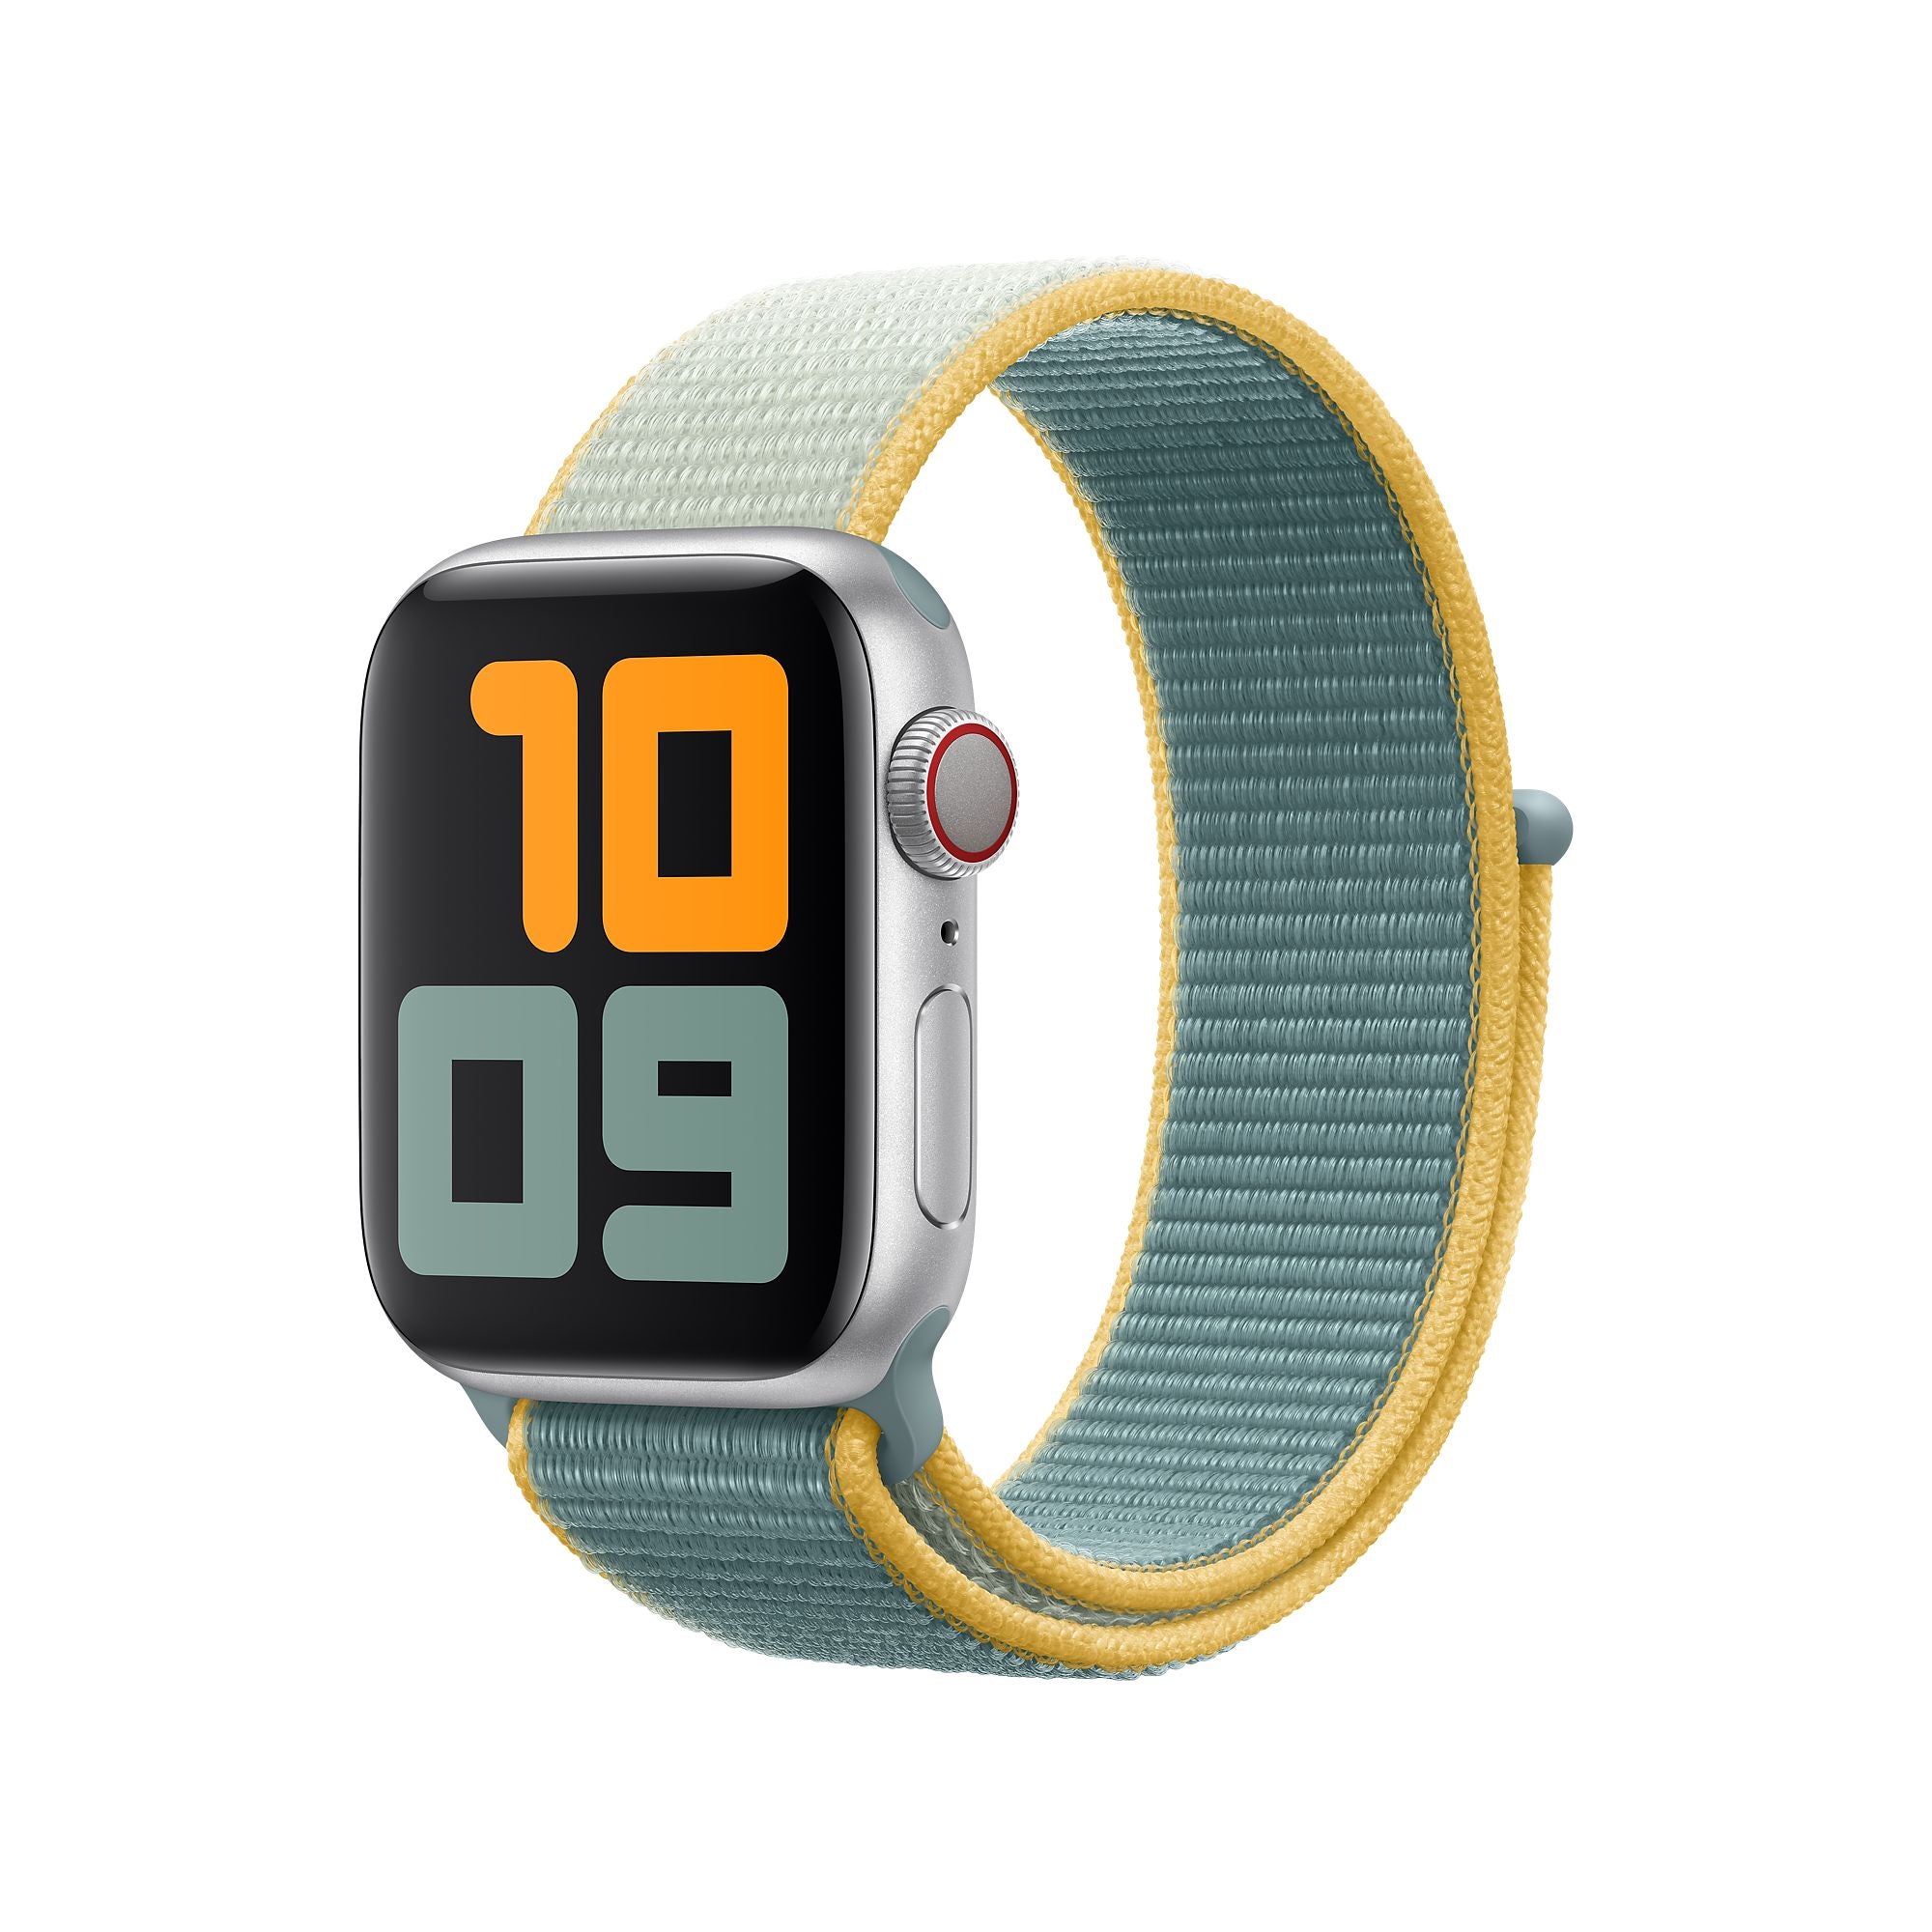 [Apple Watch] Sports Loop (Velcro) - Contrasting Colours